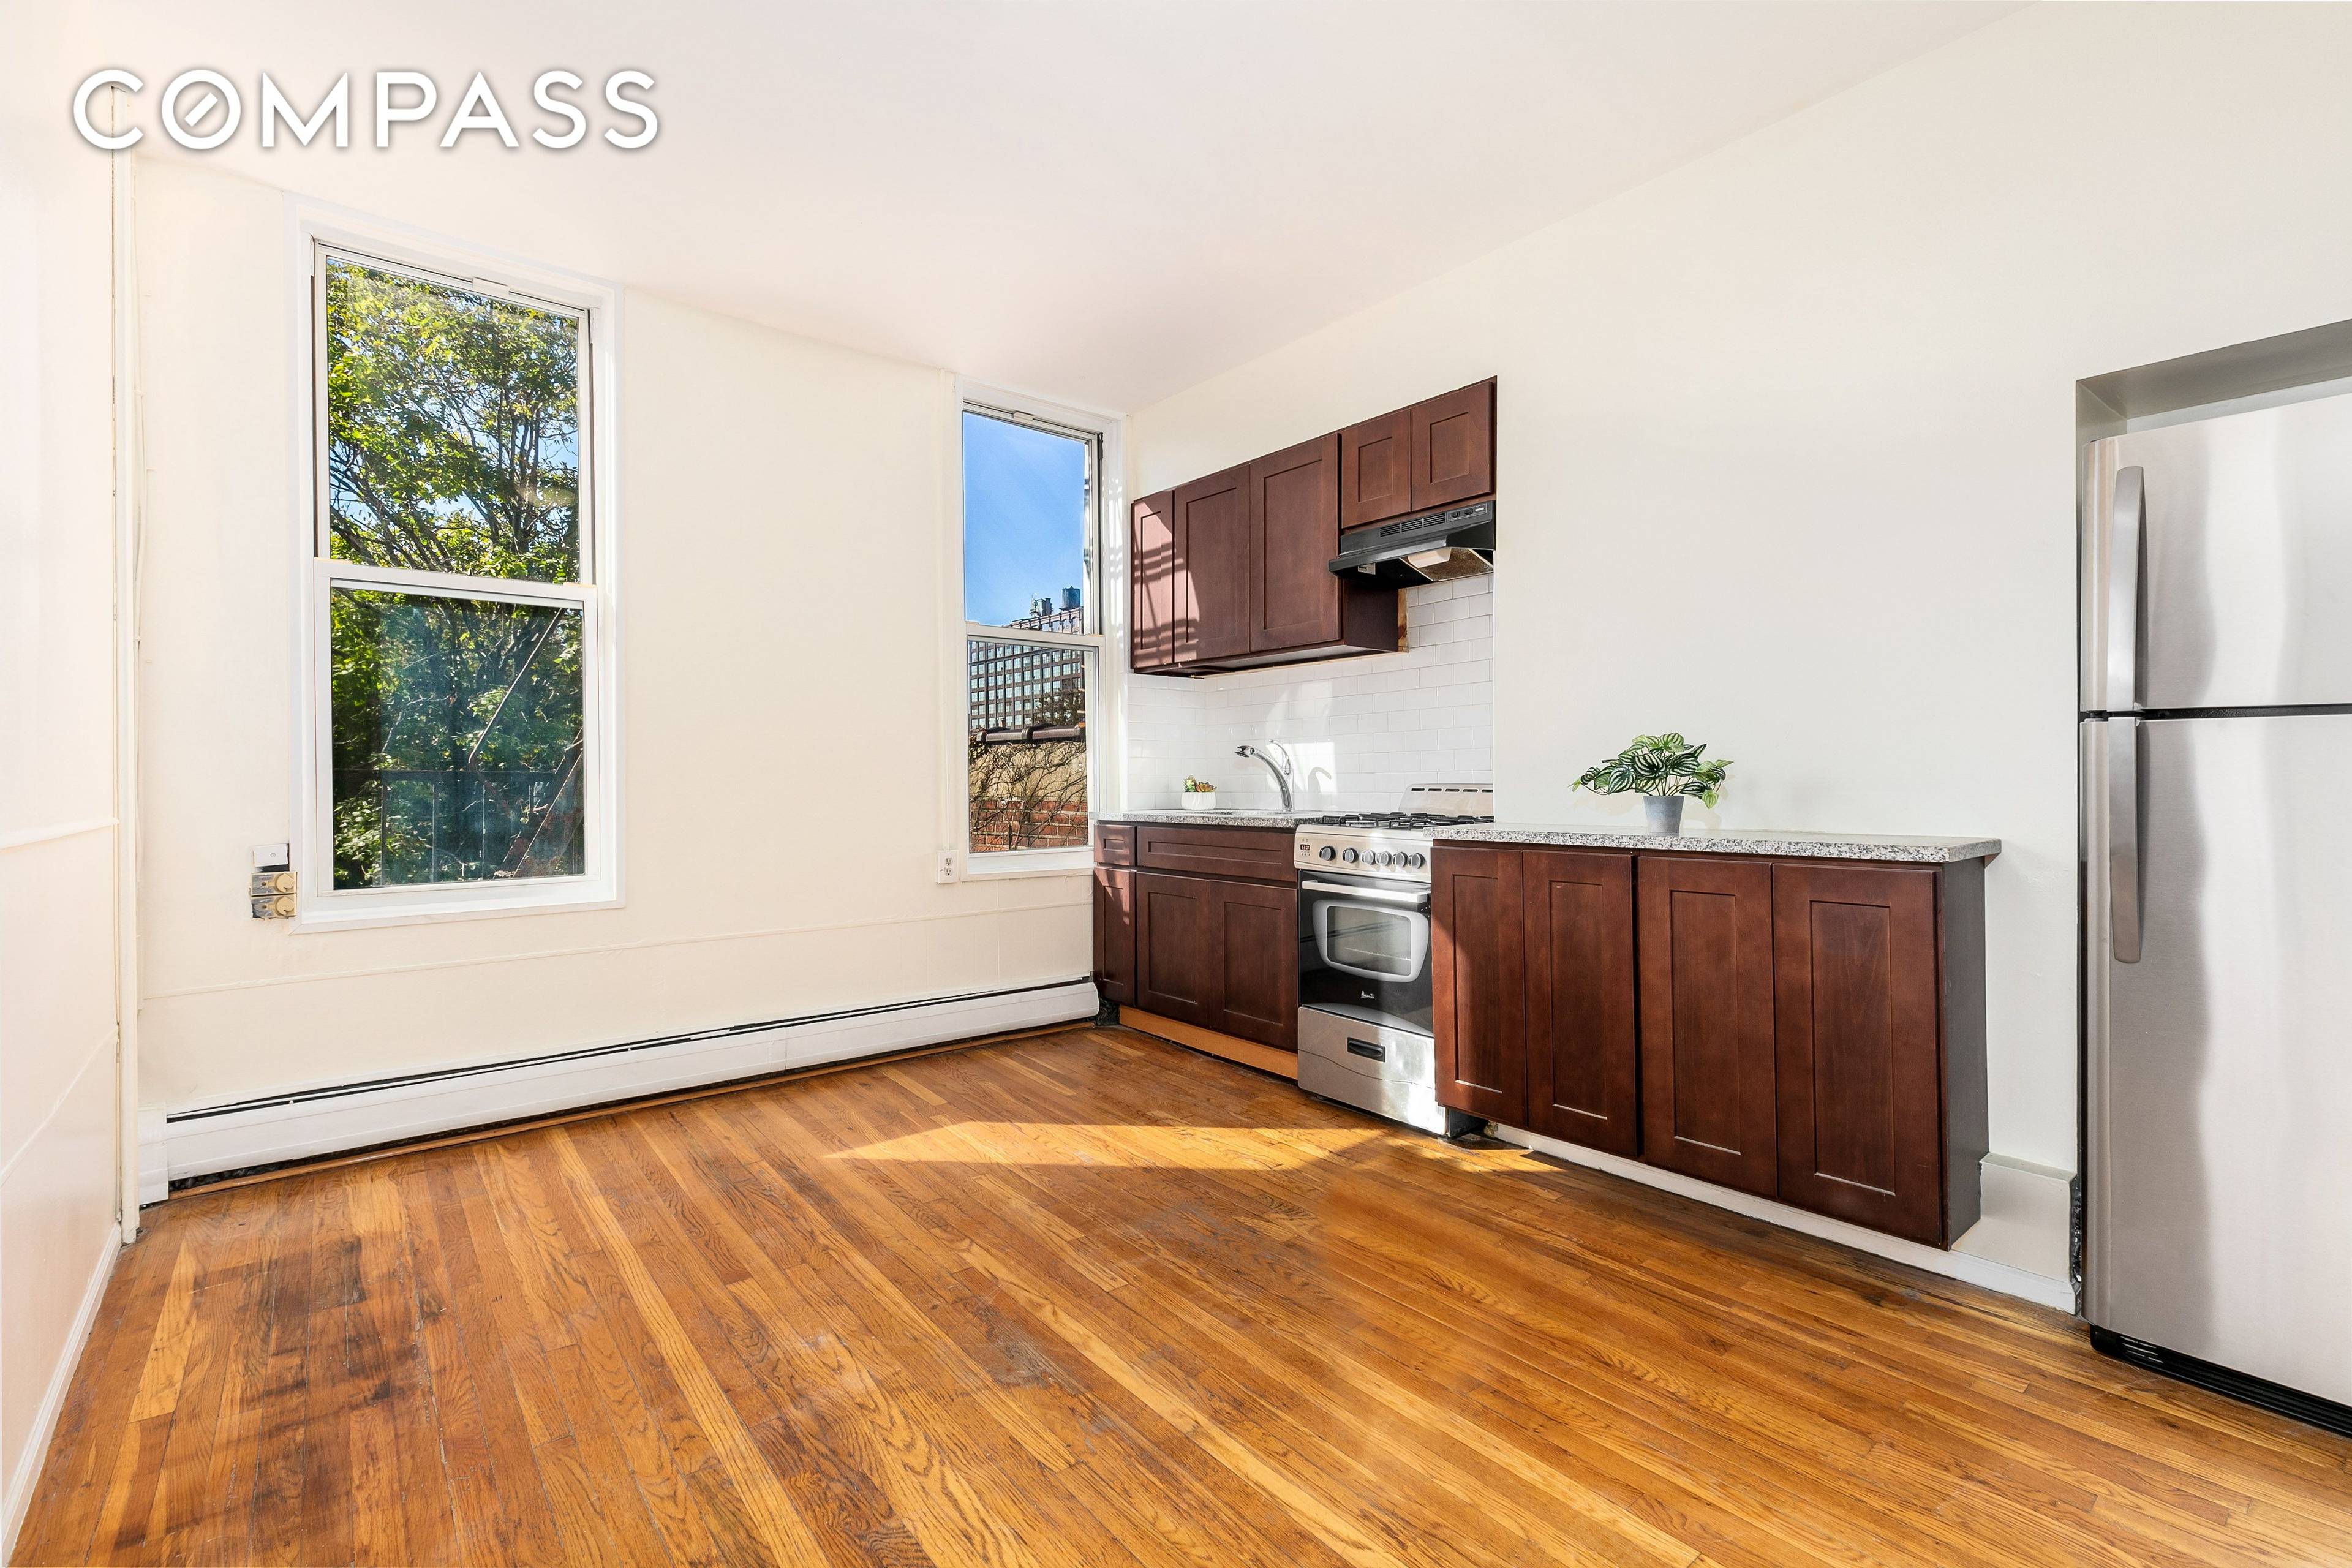 Rarely does a true 3 family property become available in the up and coming neighborhood of Greenwood Heights, offering spacious living and serene surroundings.